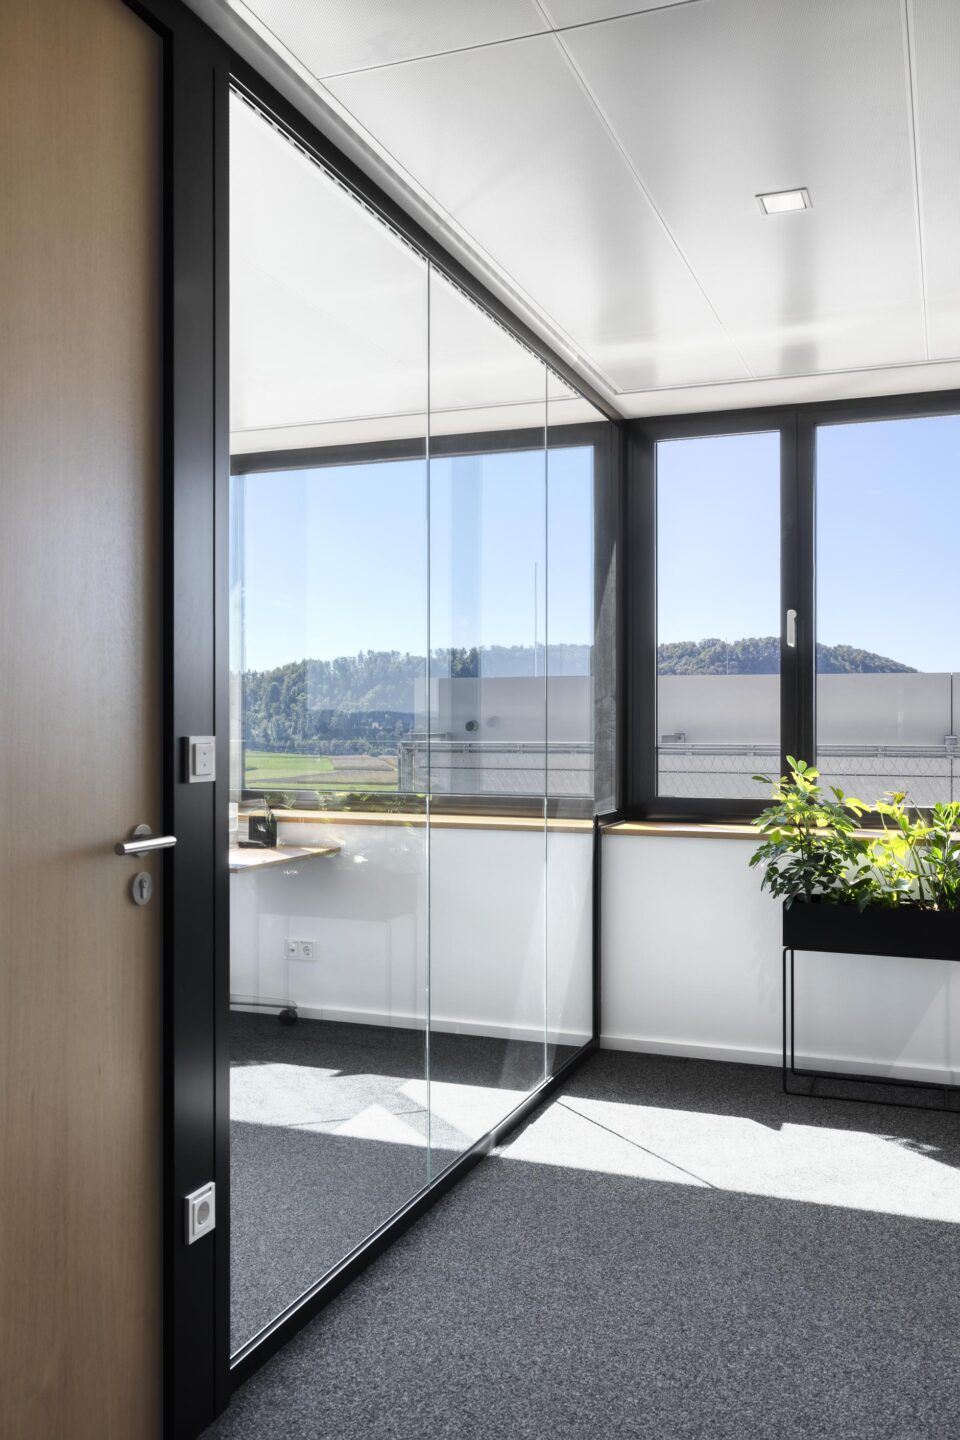 Rheinhalde Development | hallway with glass wall and view of the outside scenery